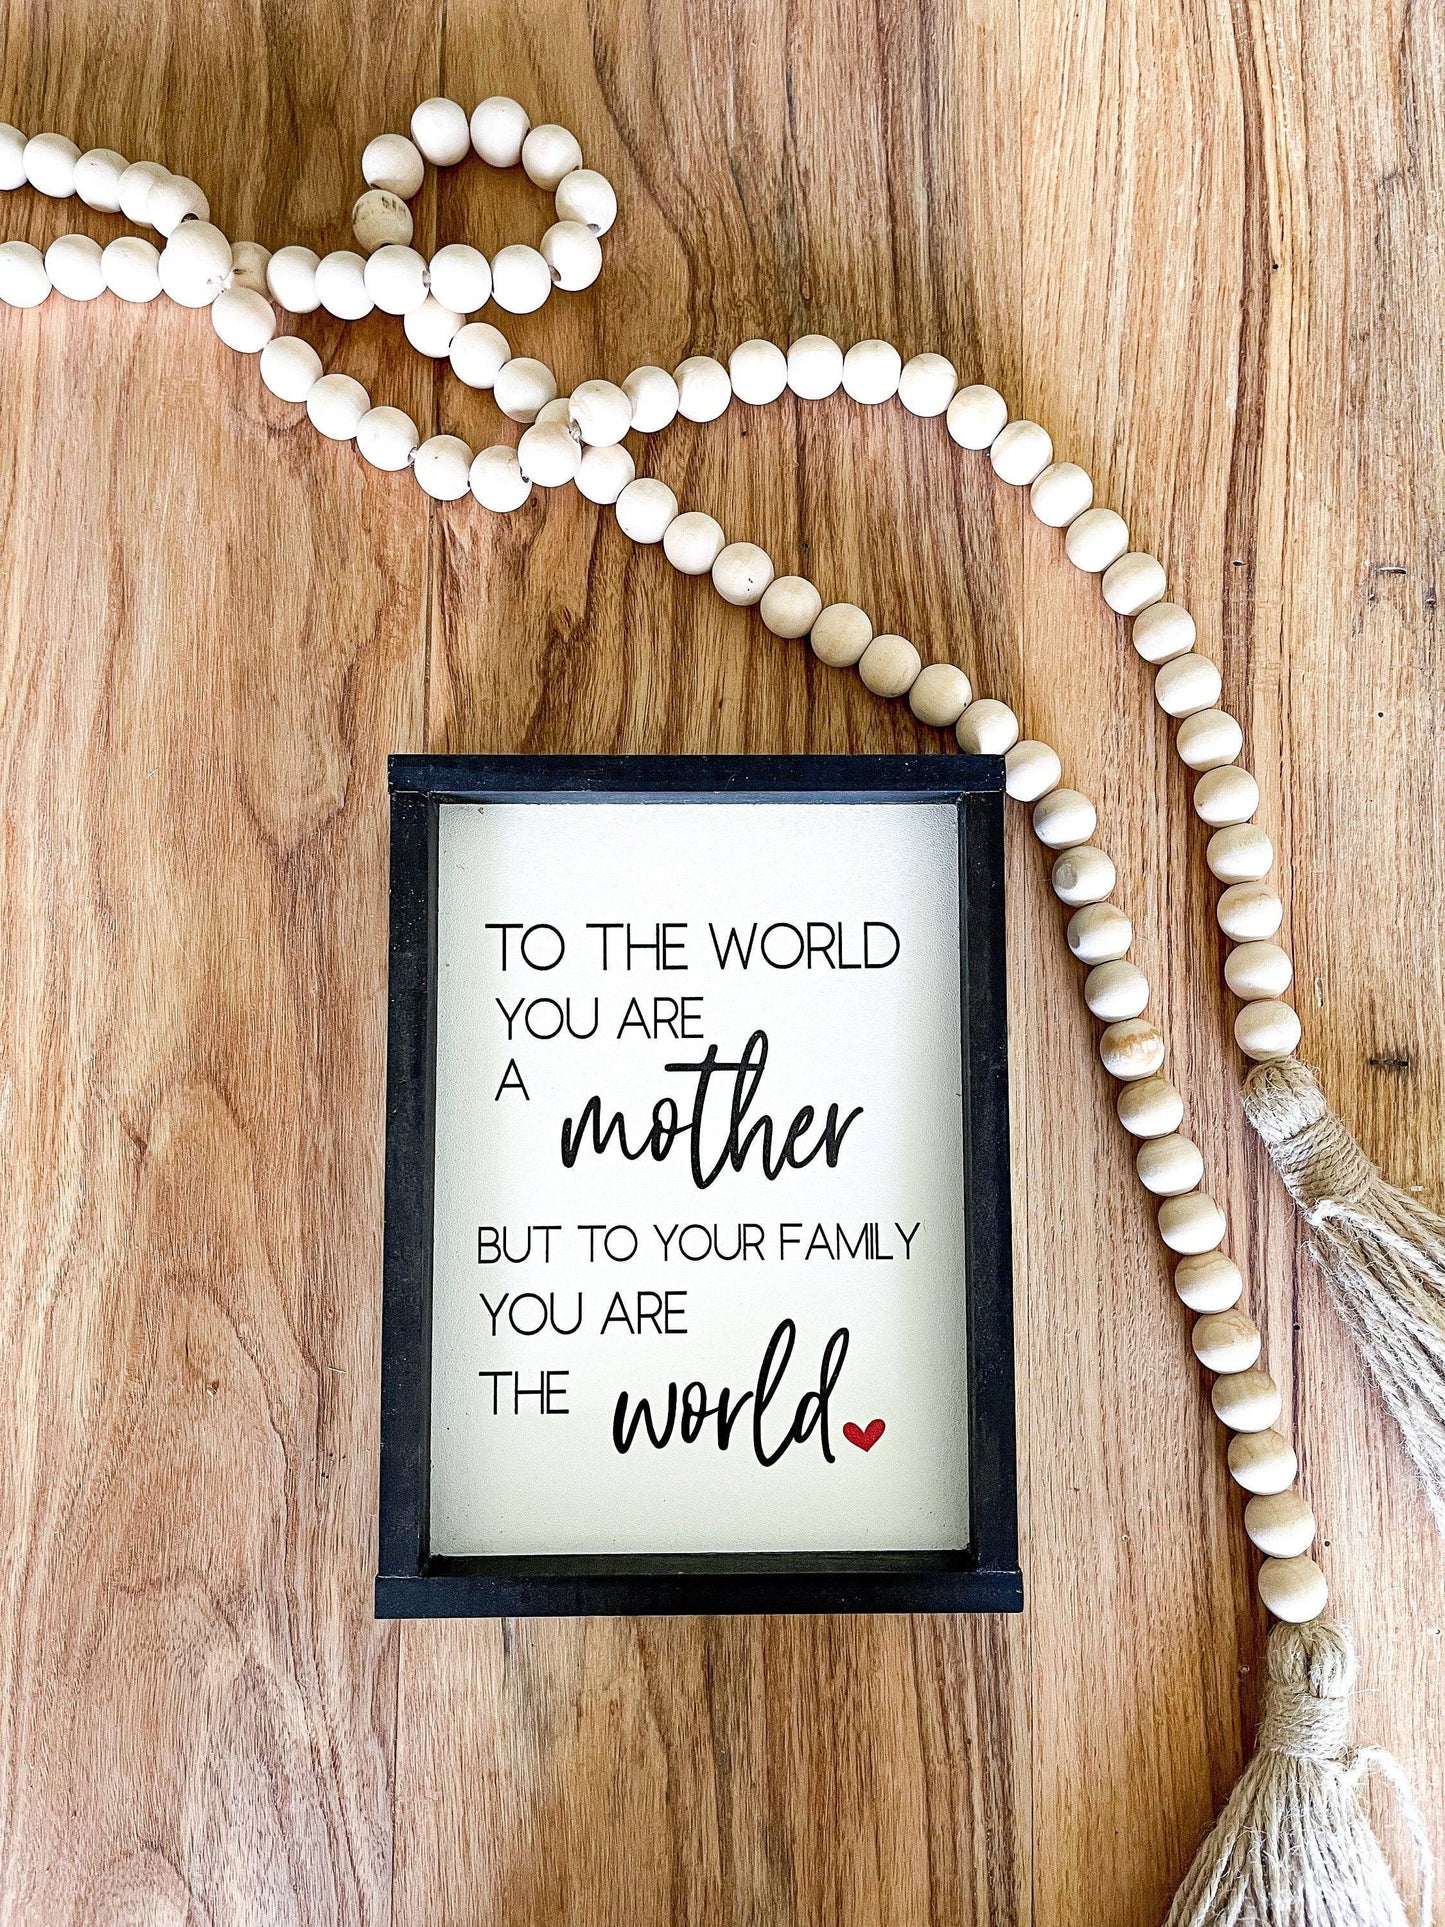 Simply Stained Shop - To the world you are a mother but to your family you are the world Wood sign